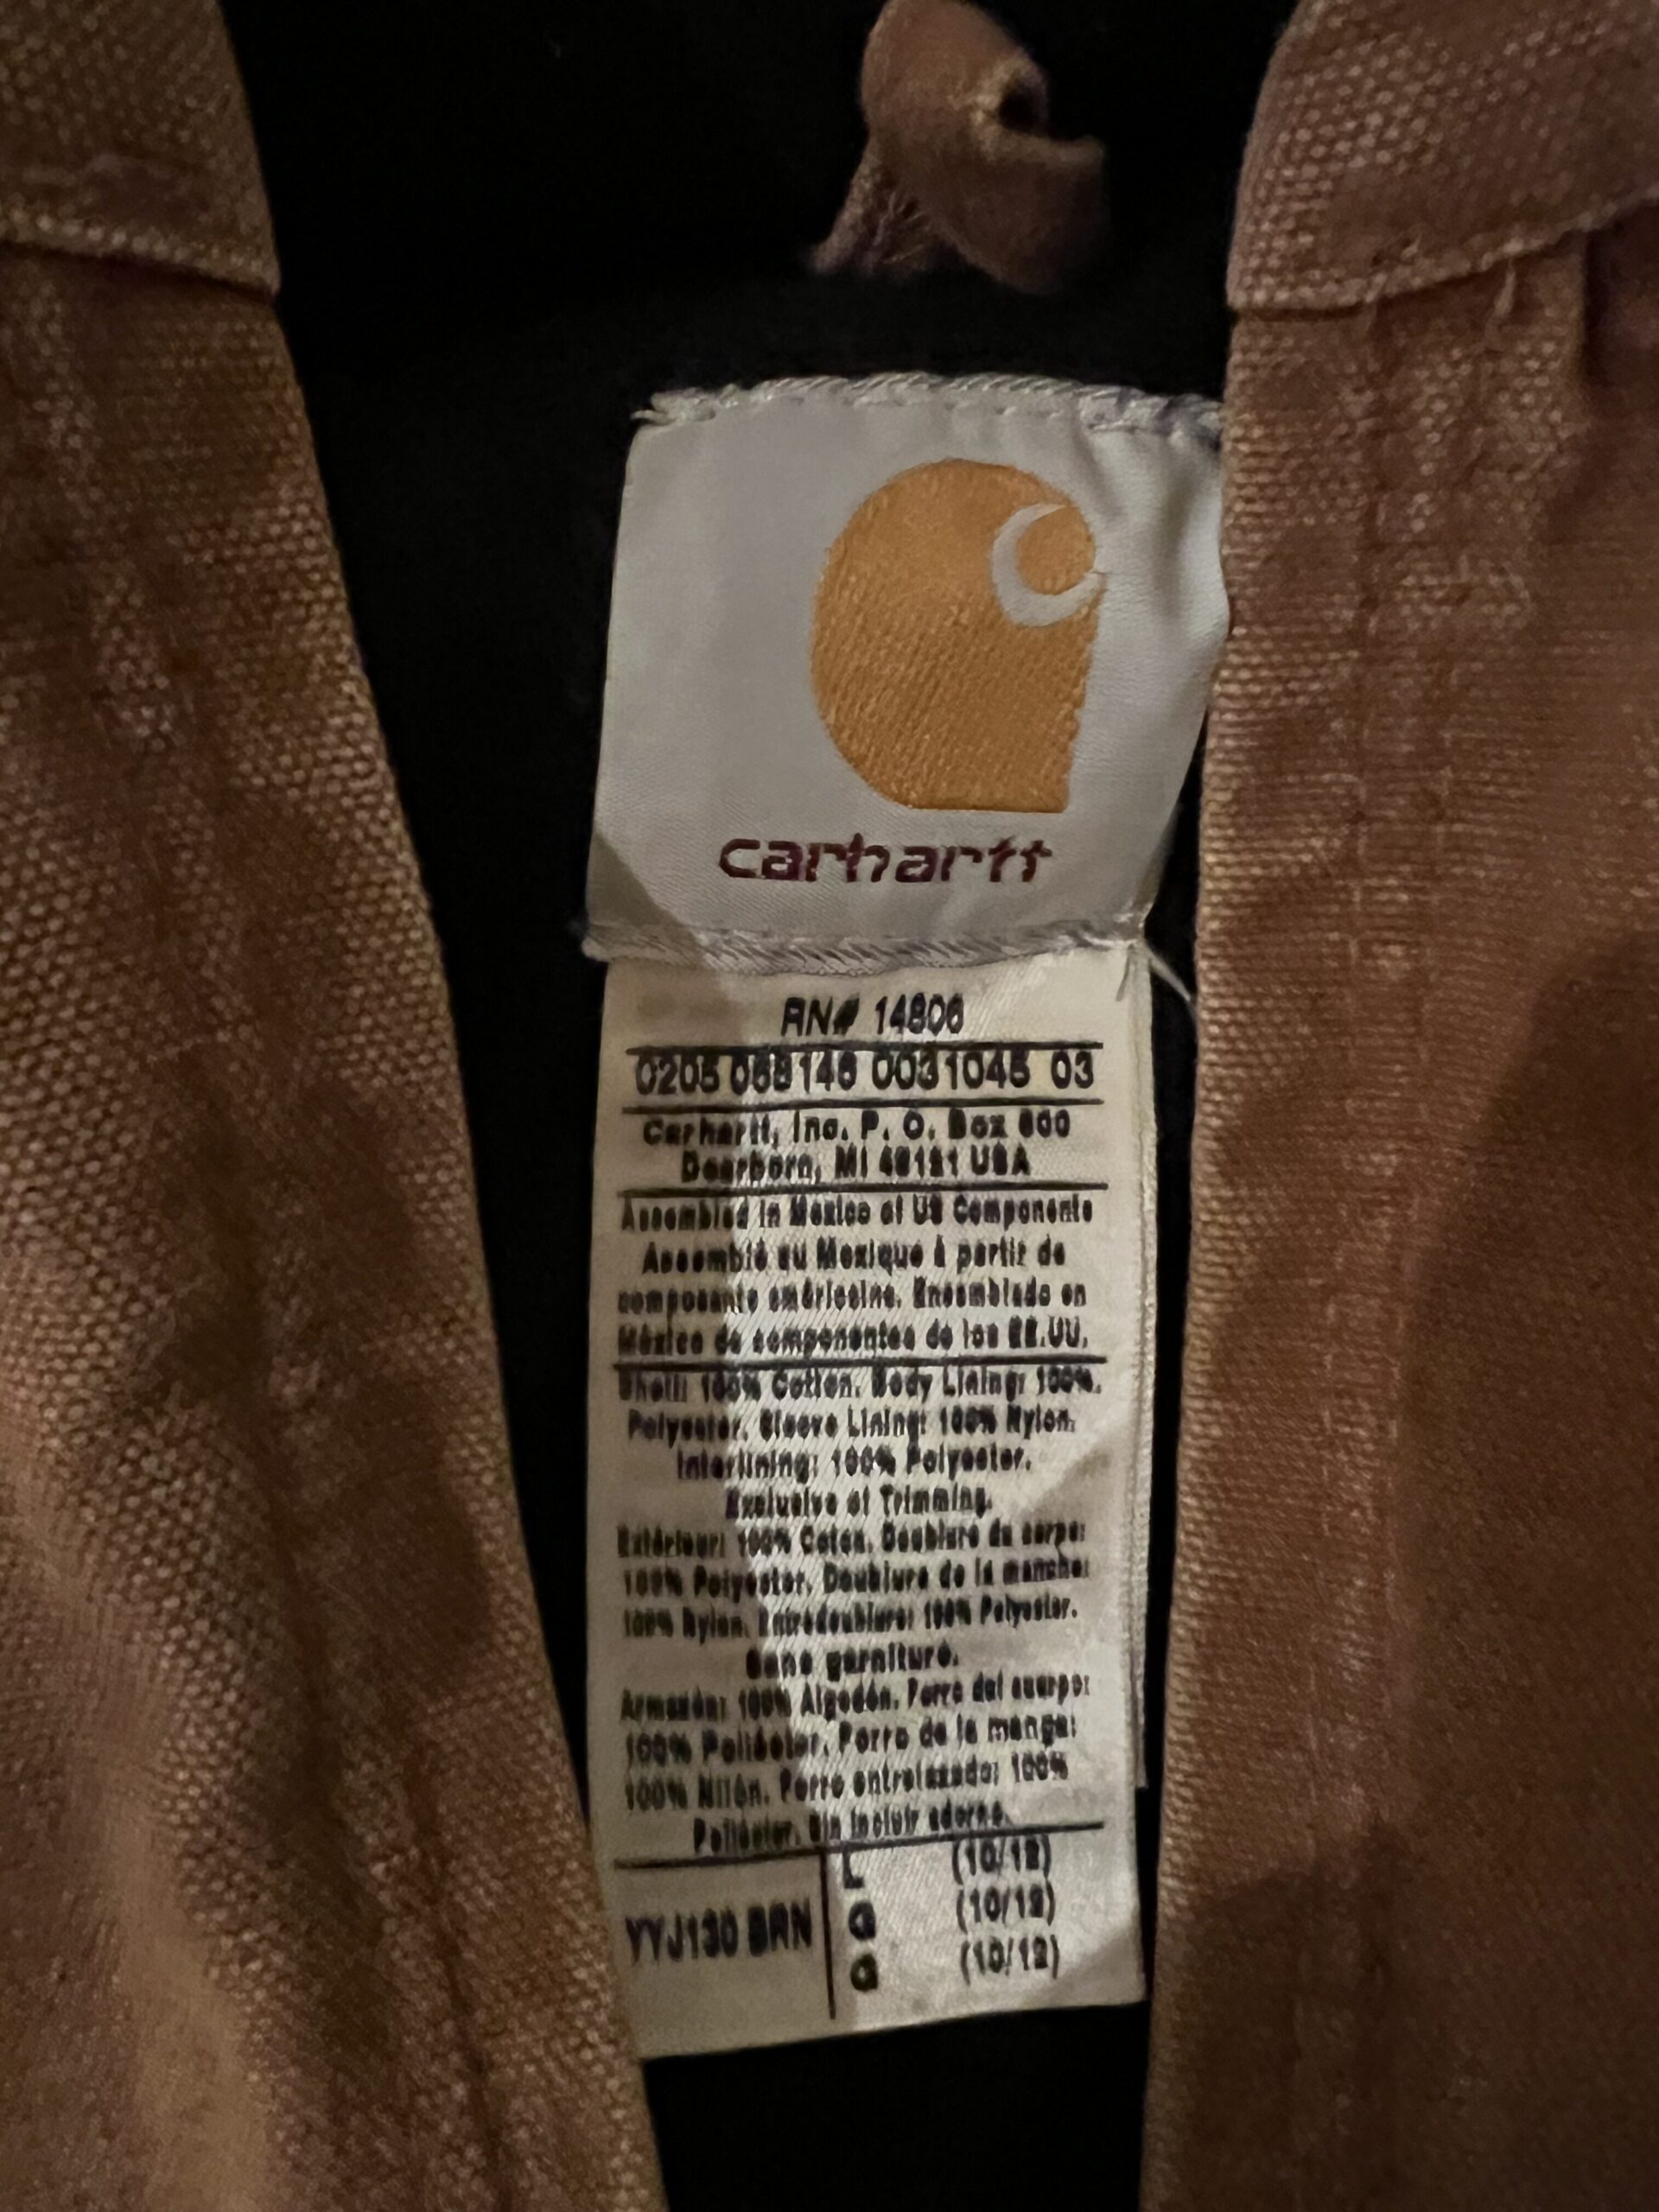 Youth Carhartt jacket - Classified Ads - Classified Ads | In-Depth Outdoors